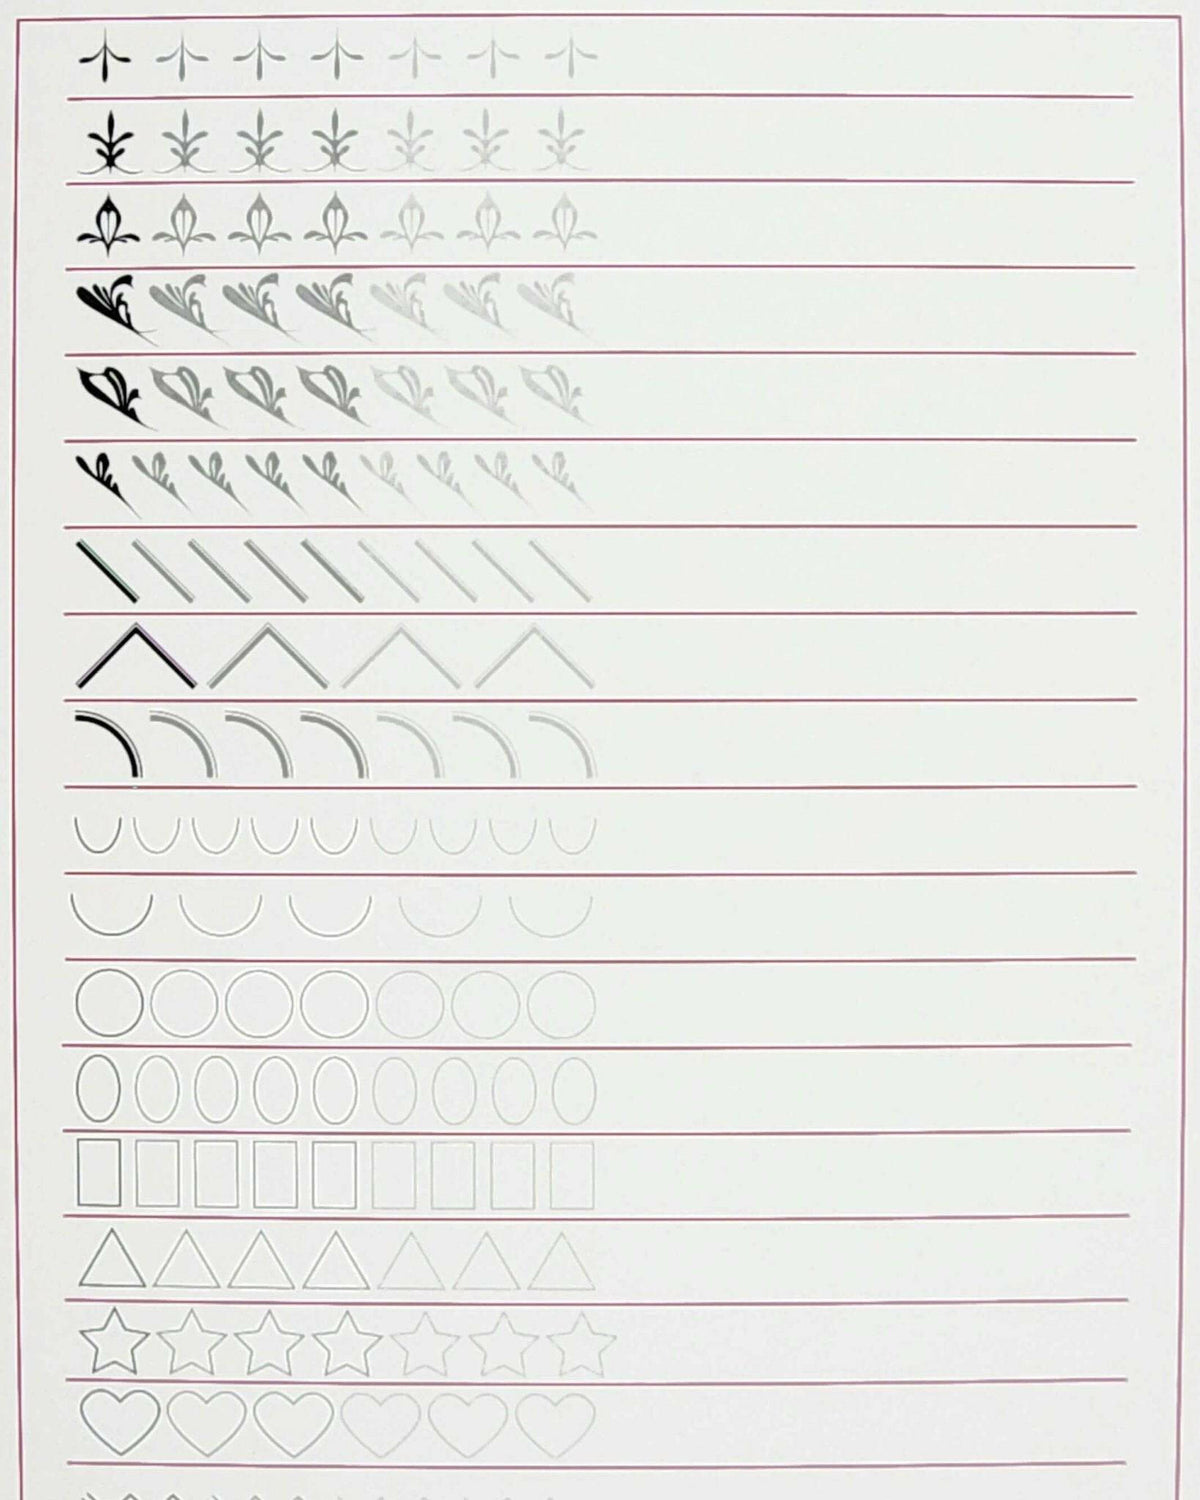 NICENEEDED 12 Sheets Nail Art Practice Book, Clean Manicure Training Cards  for Beginner Lines Painting, Lines Drawing Painting Template Learning Book  for Acrylic Fingernails : Amazon.ca: Beauty & Personal Care